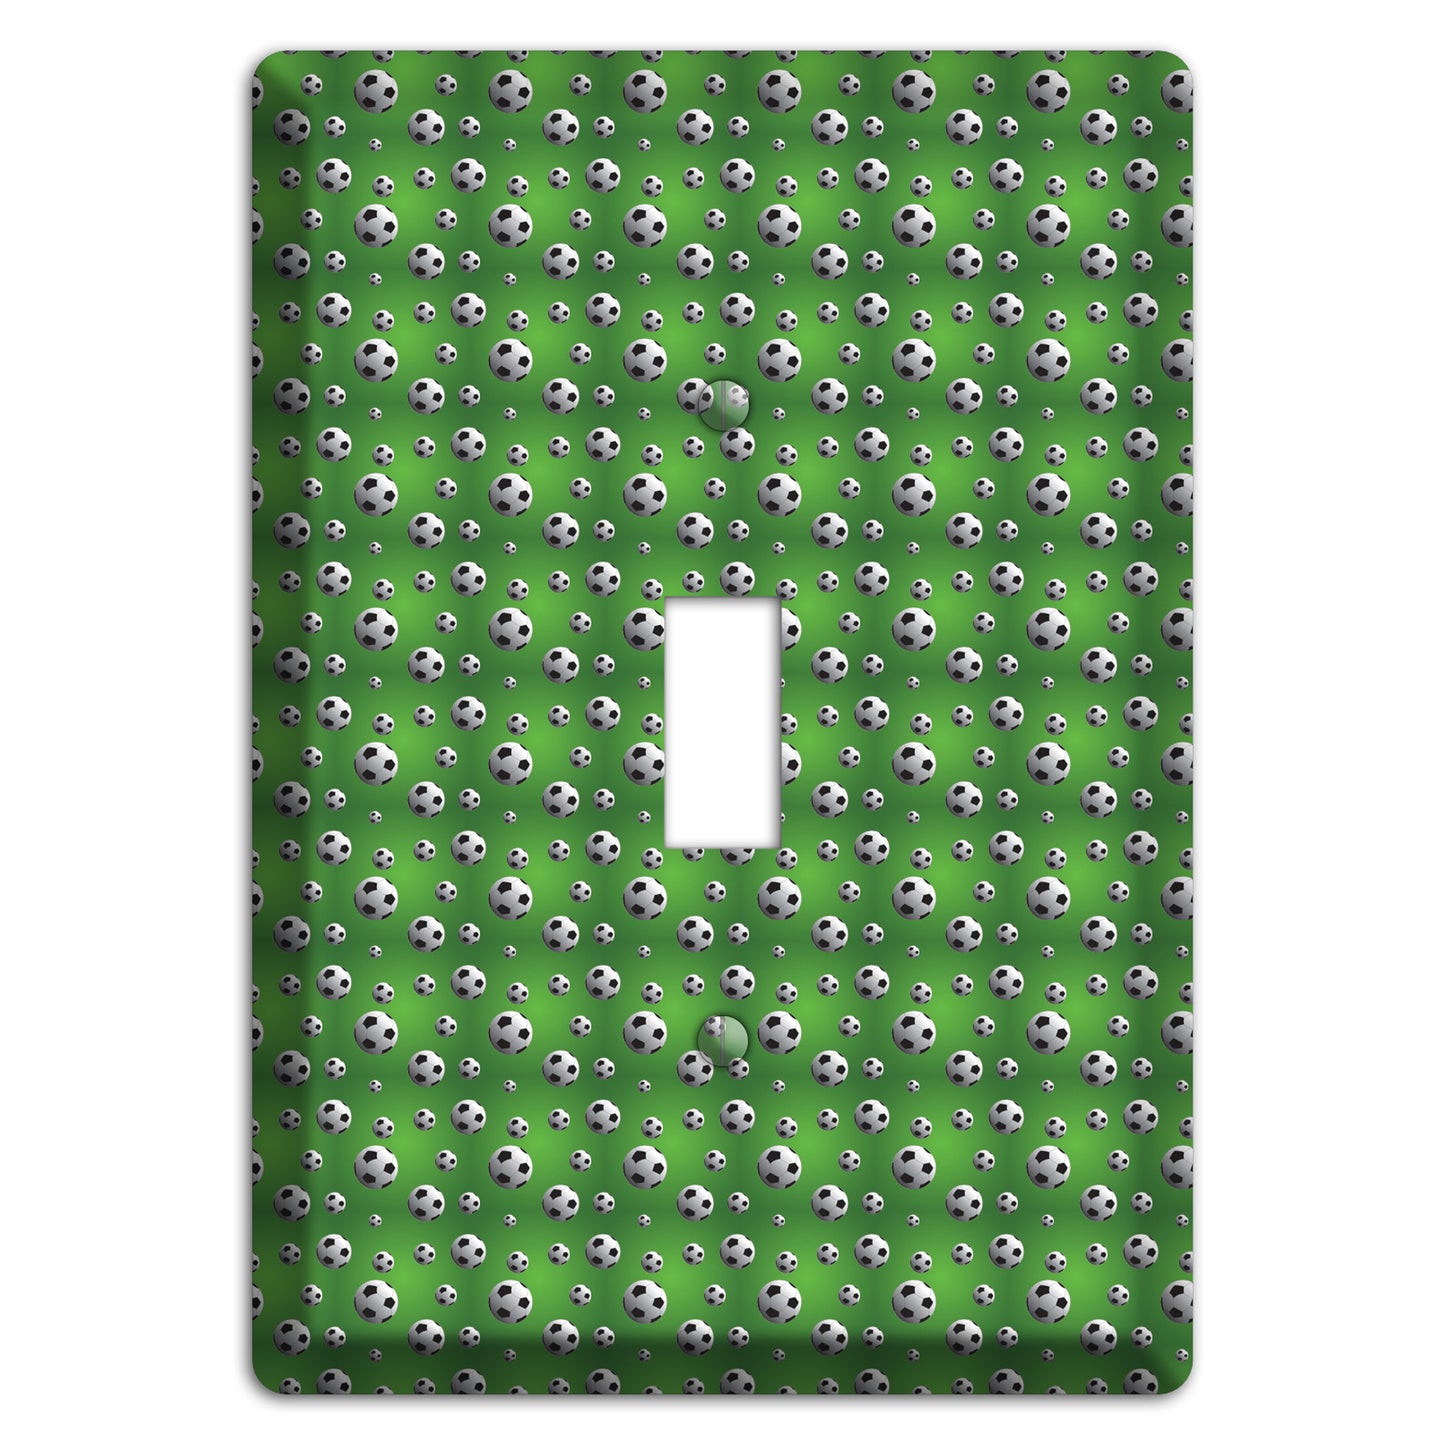 Green with Soccer Balls Cover Plates